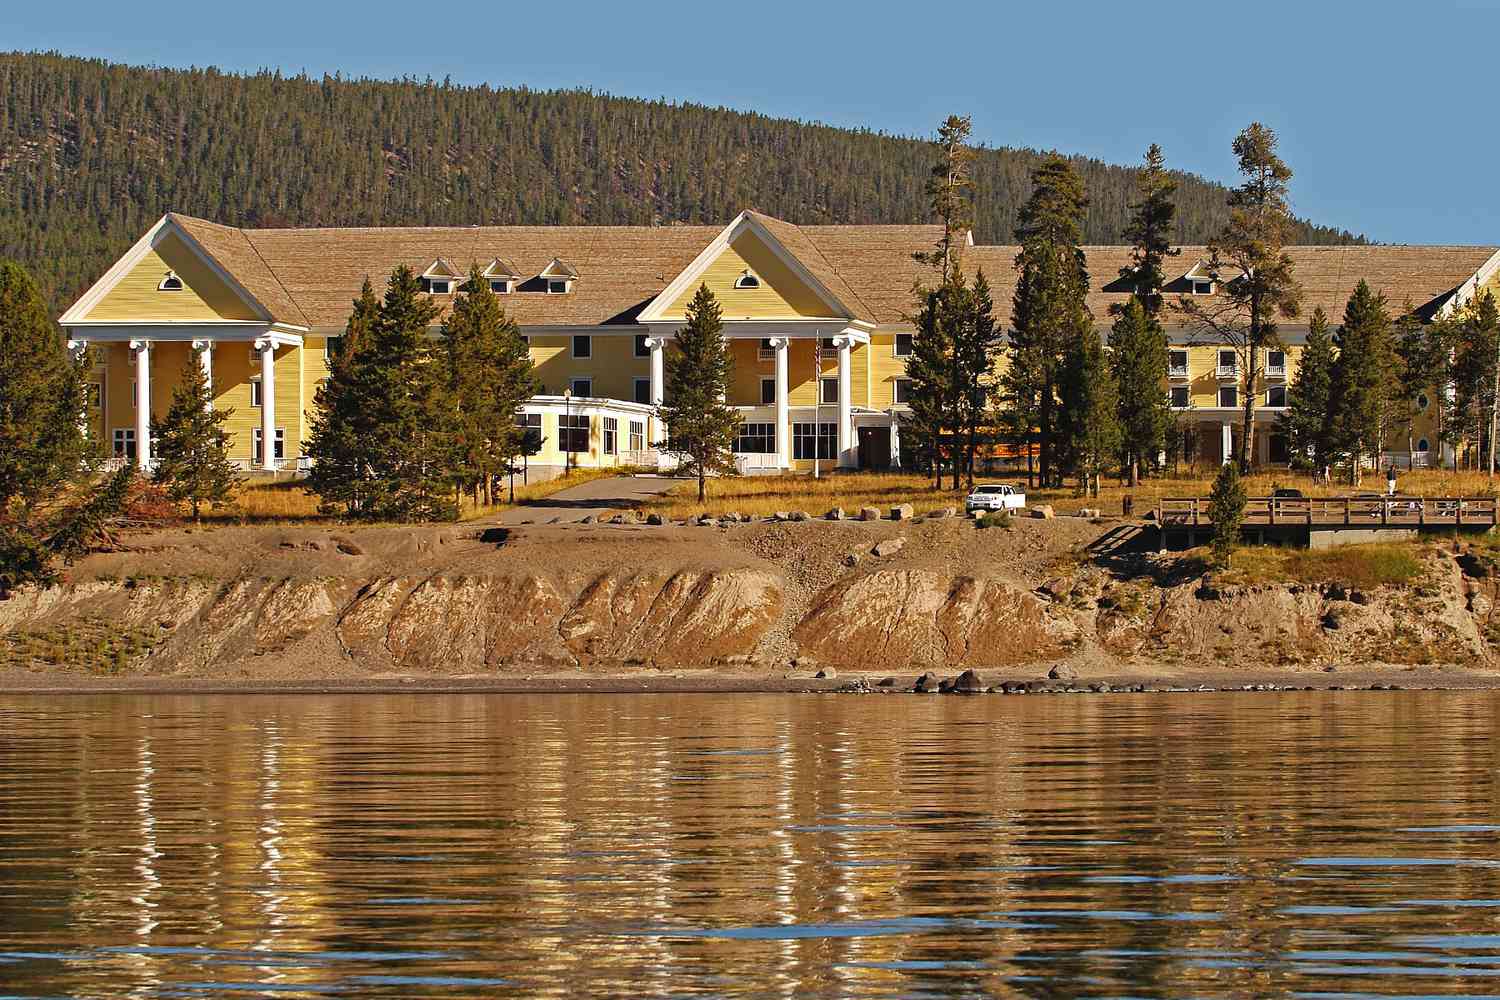 Where To Stay In Yellowstone National Park